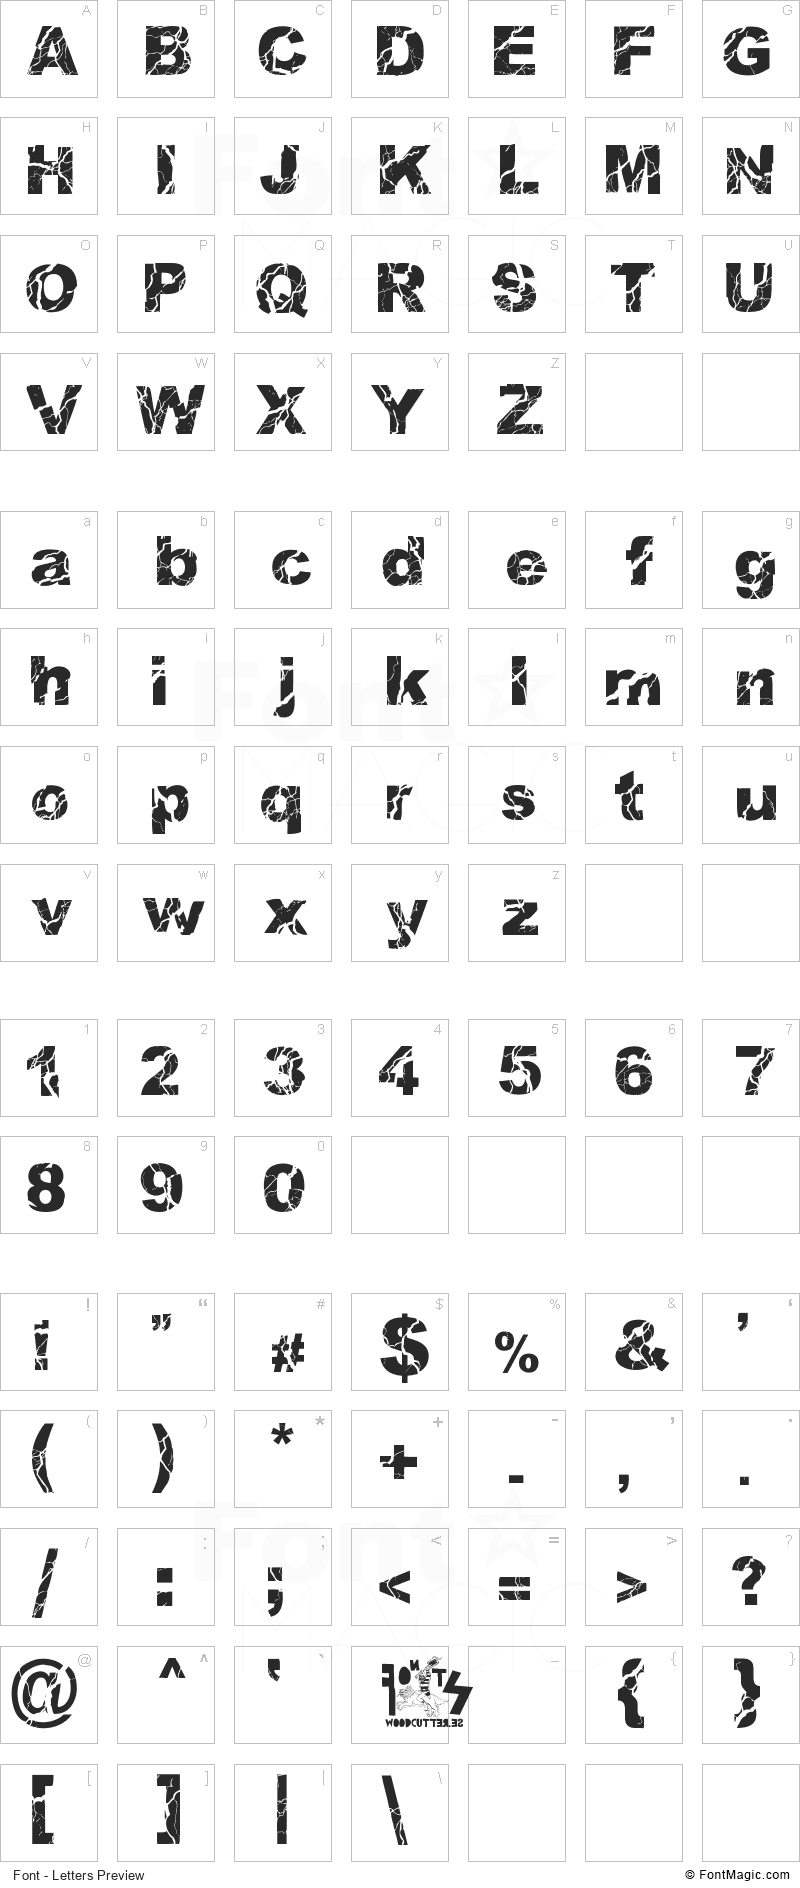 Woodcutter Storm Font - All Latters Preview Chart